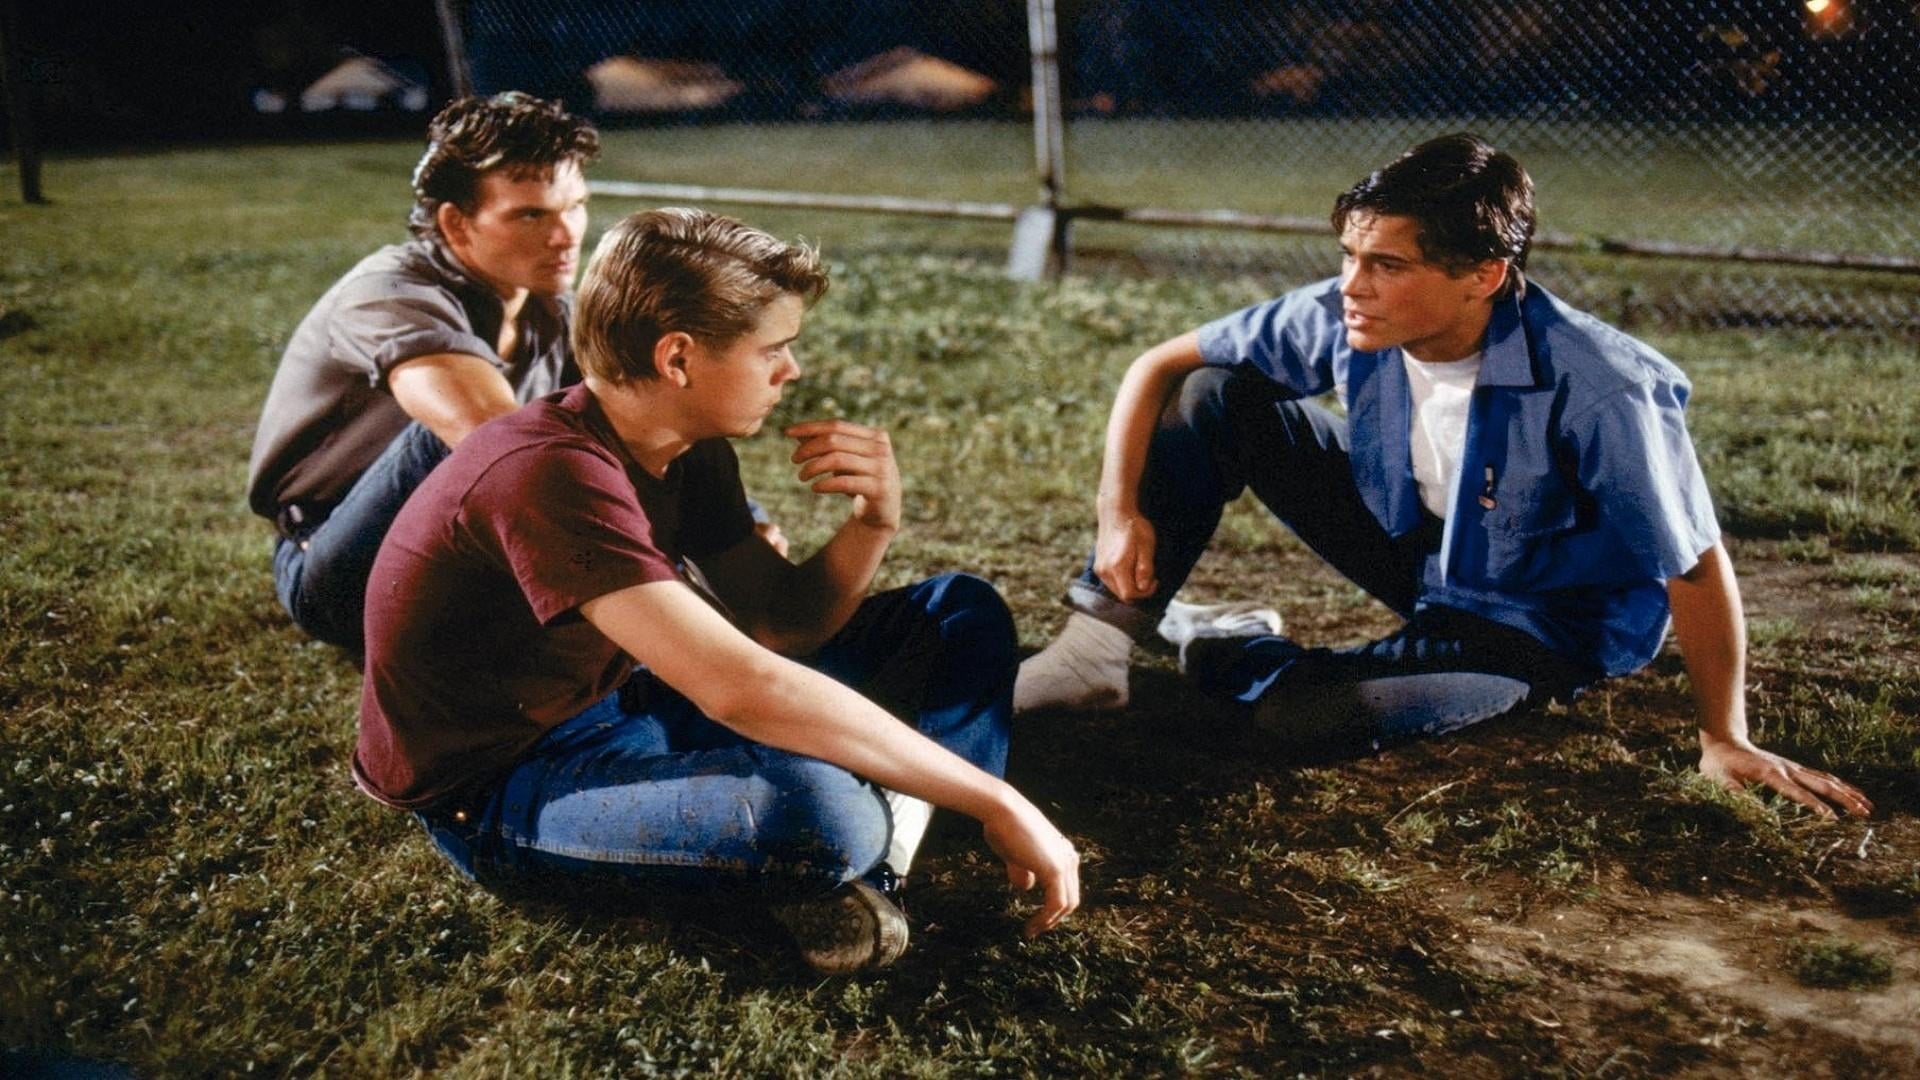 Watch The Outsiders (1983) Full Movie Online in HD Quality -